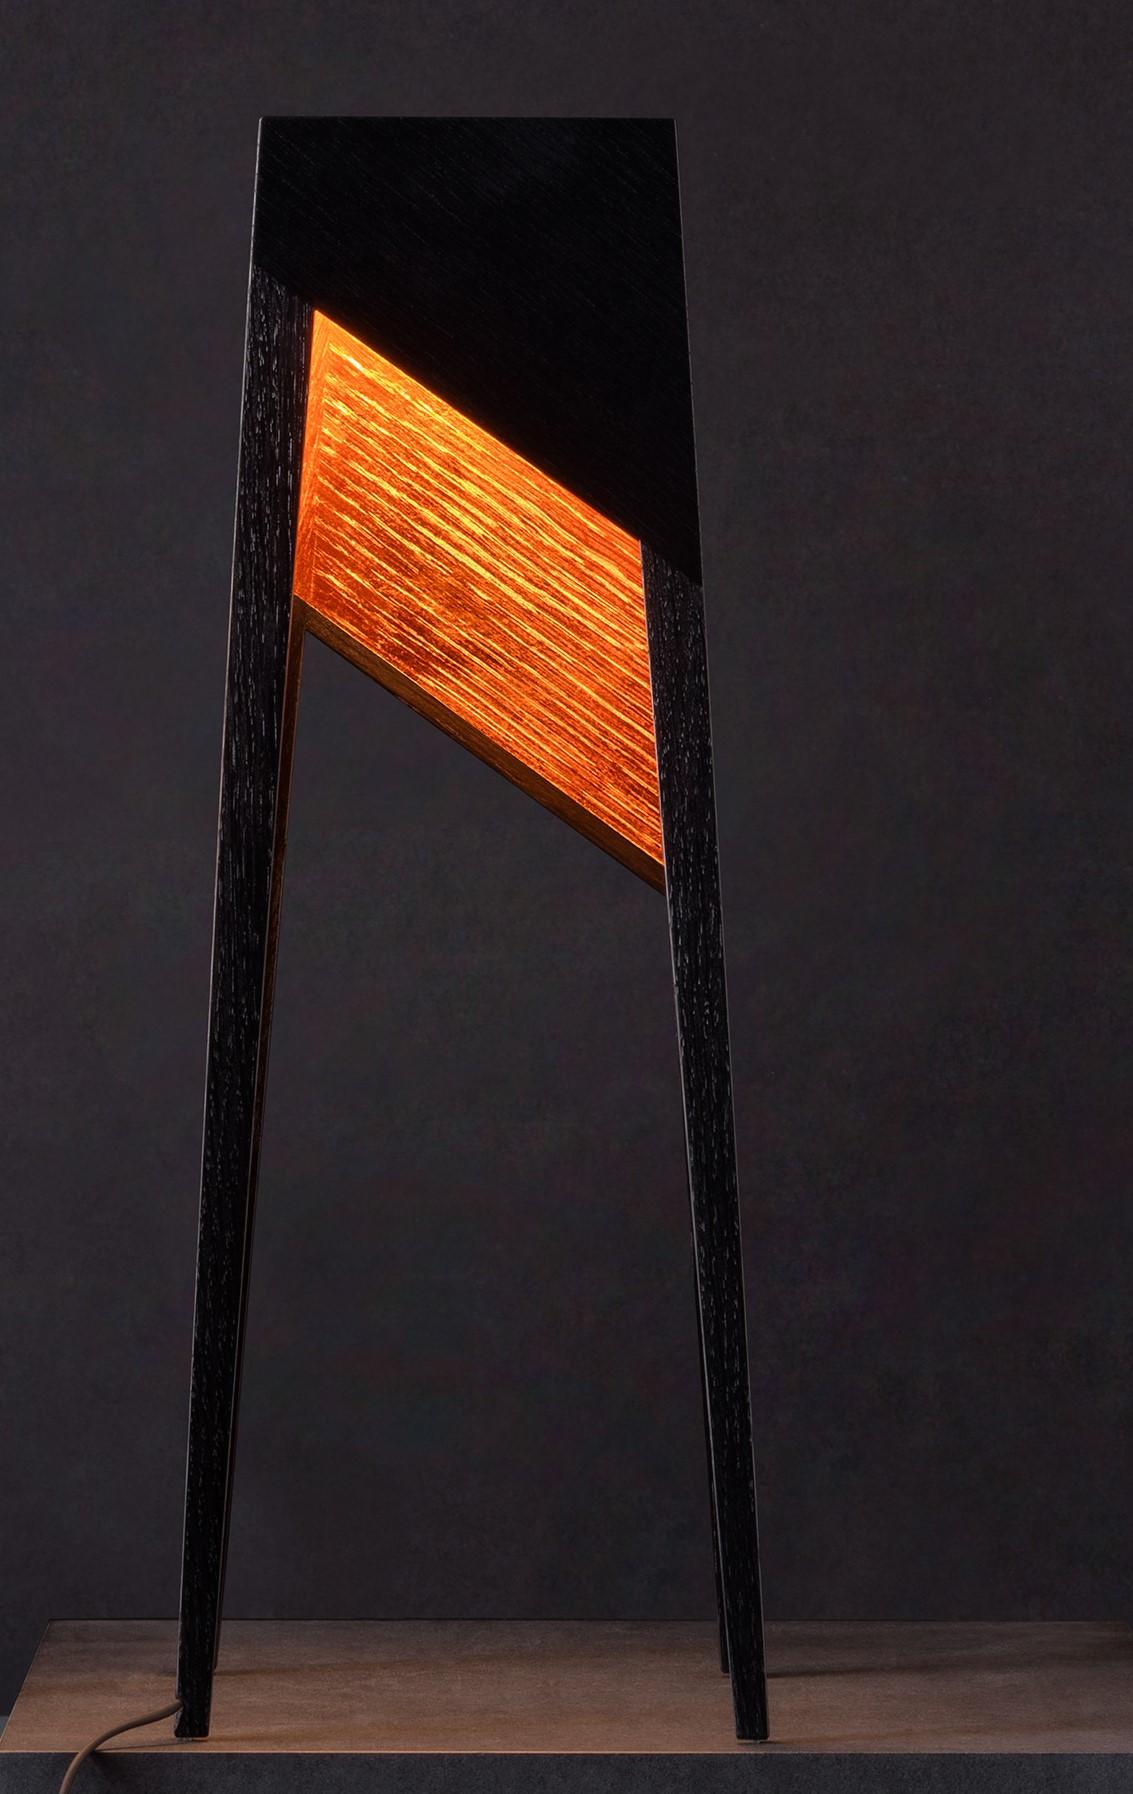 Luise LTD baby floor lamp by Matthias Scherzinger
Limited Edition of 2
Dimensions: H 46.5 x 18 cm
Materials: solid wood - oak black stained hard wax
Inside Surface: copper leaf

All our lamps can be wired according to each country. If sold to